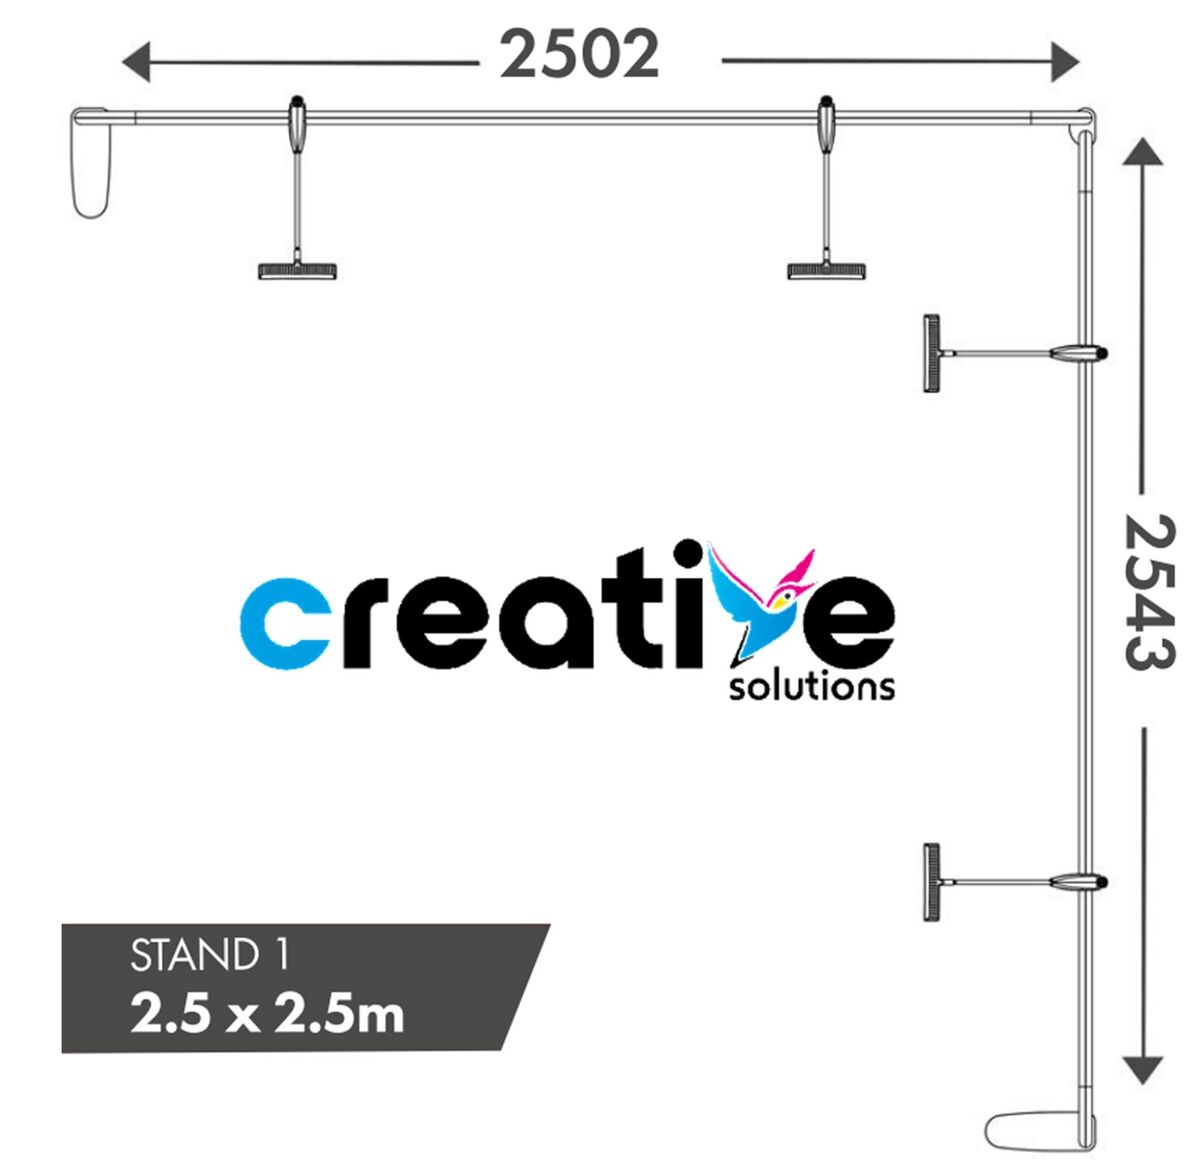 2.5x2.5 Shell Scheme Fabric Exhibition Stand Dimensions - Creative Solutions.jpg